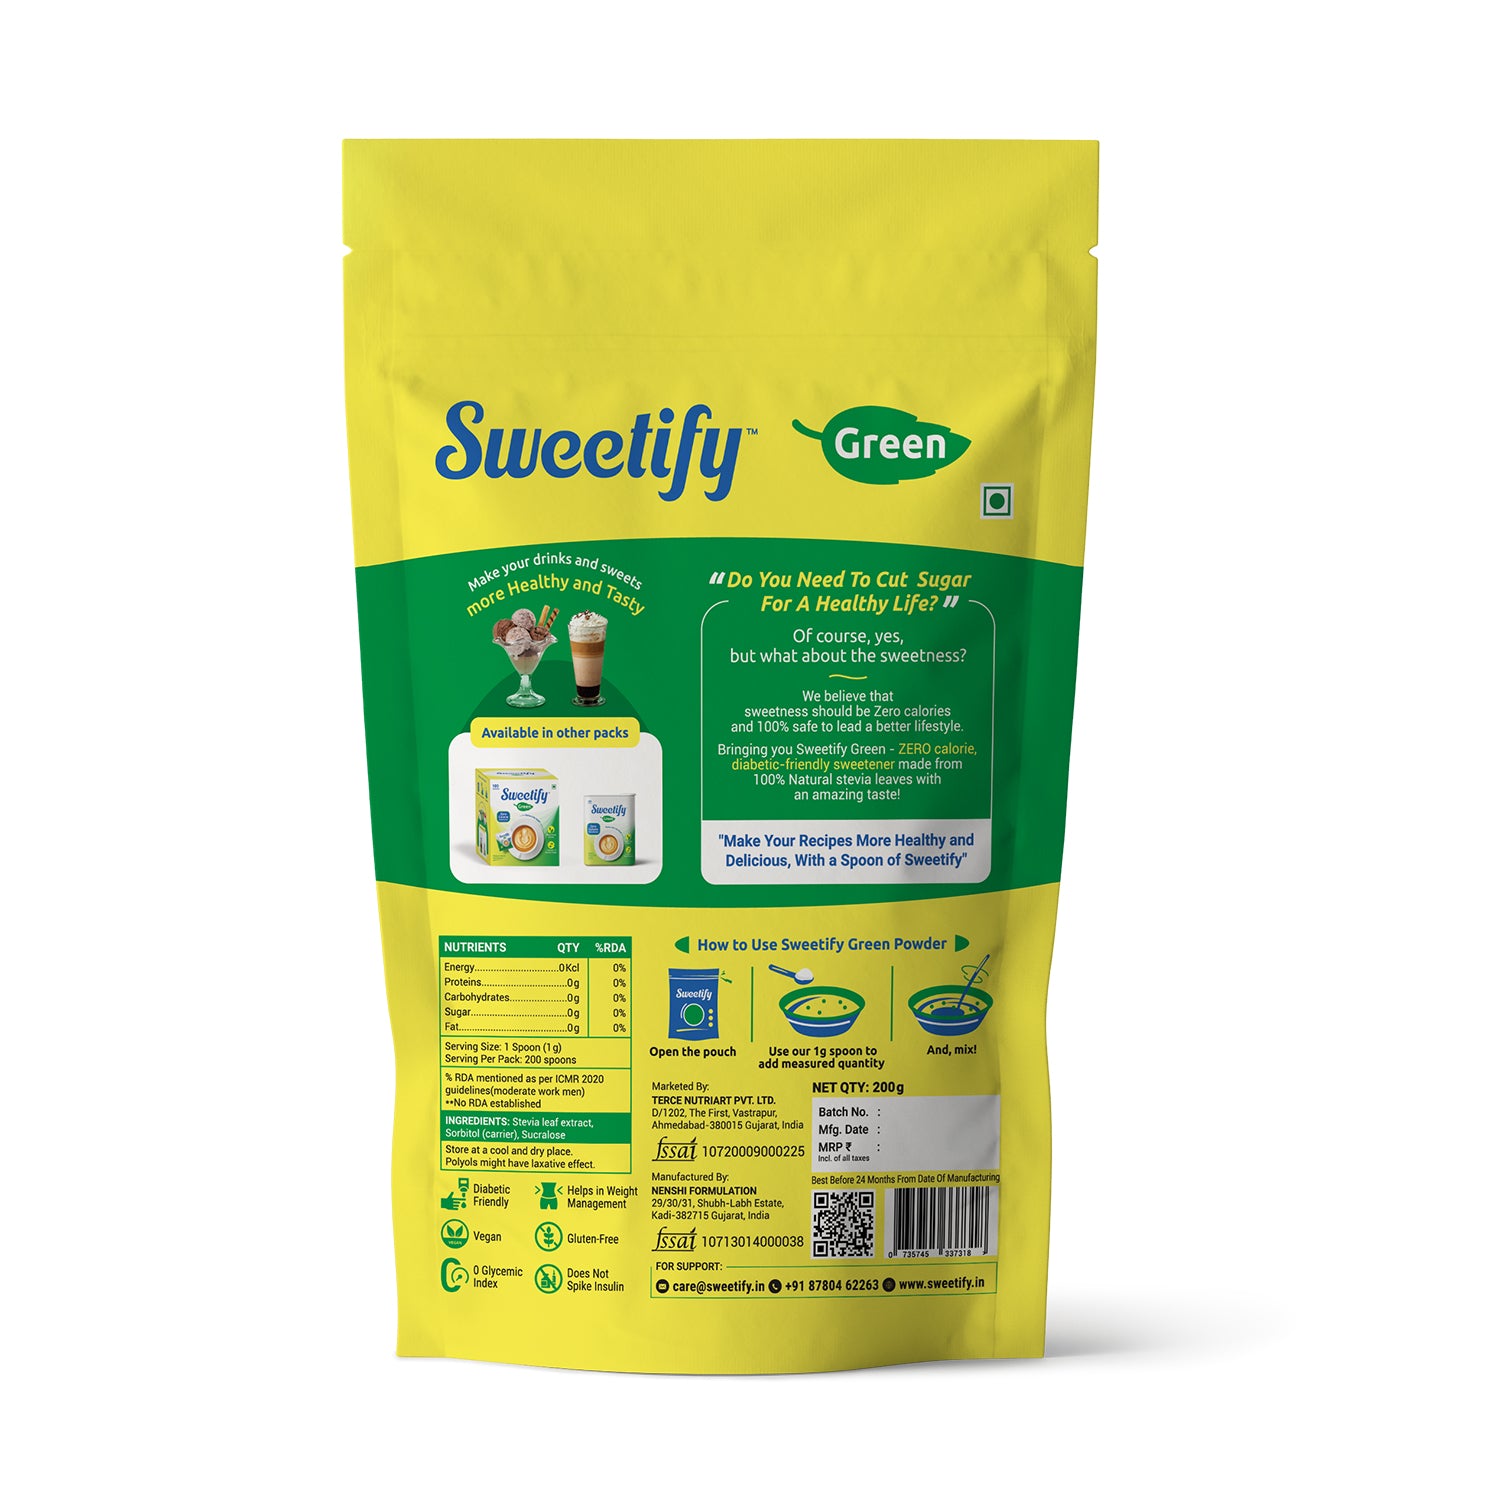 Sweetify Zero Calorie Sugar-free Stevia Sweetener Pouch Pack With Spoon